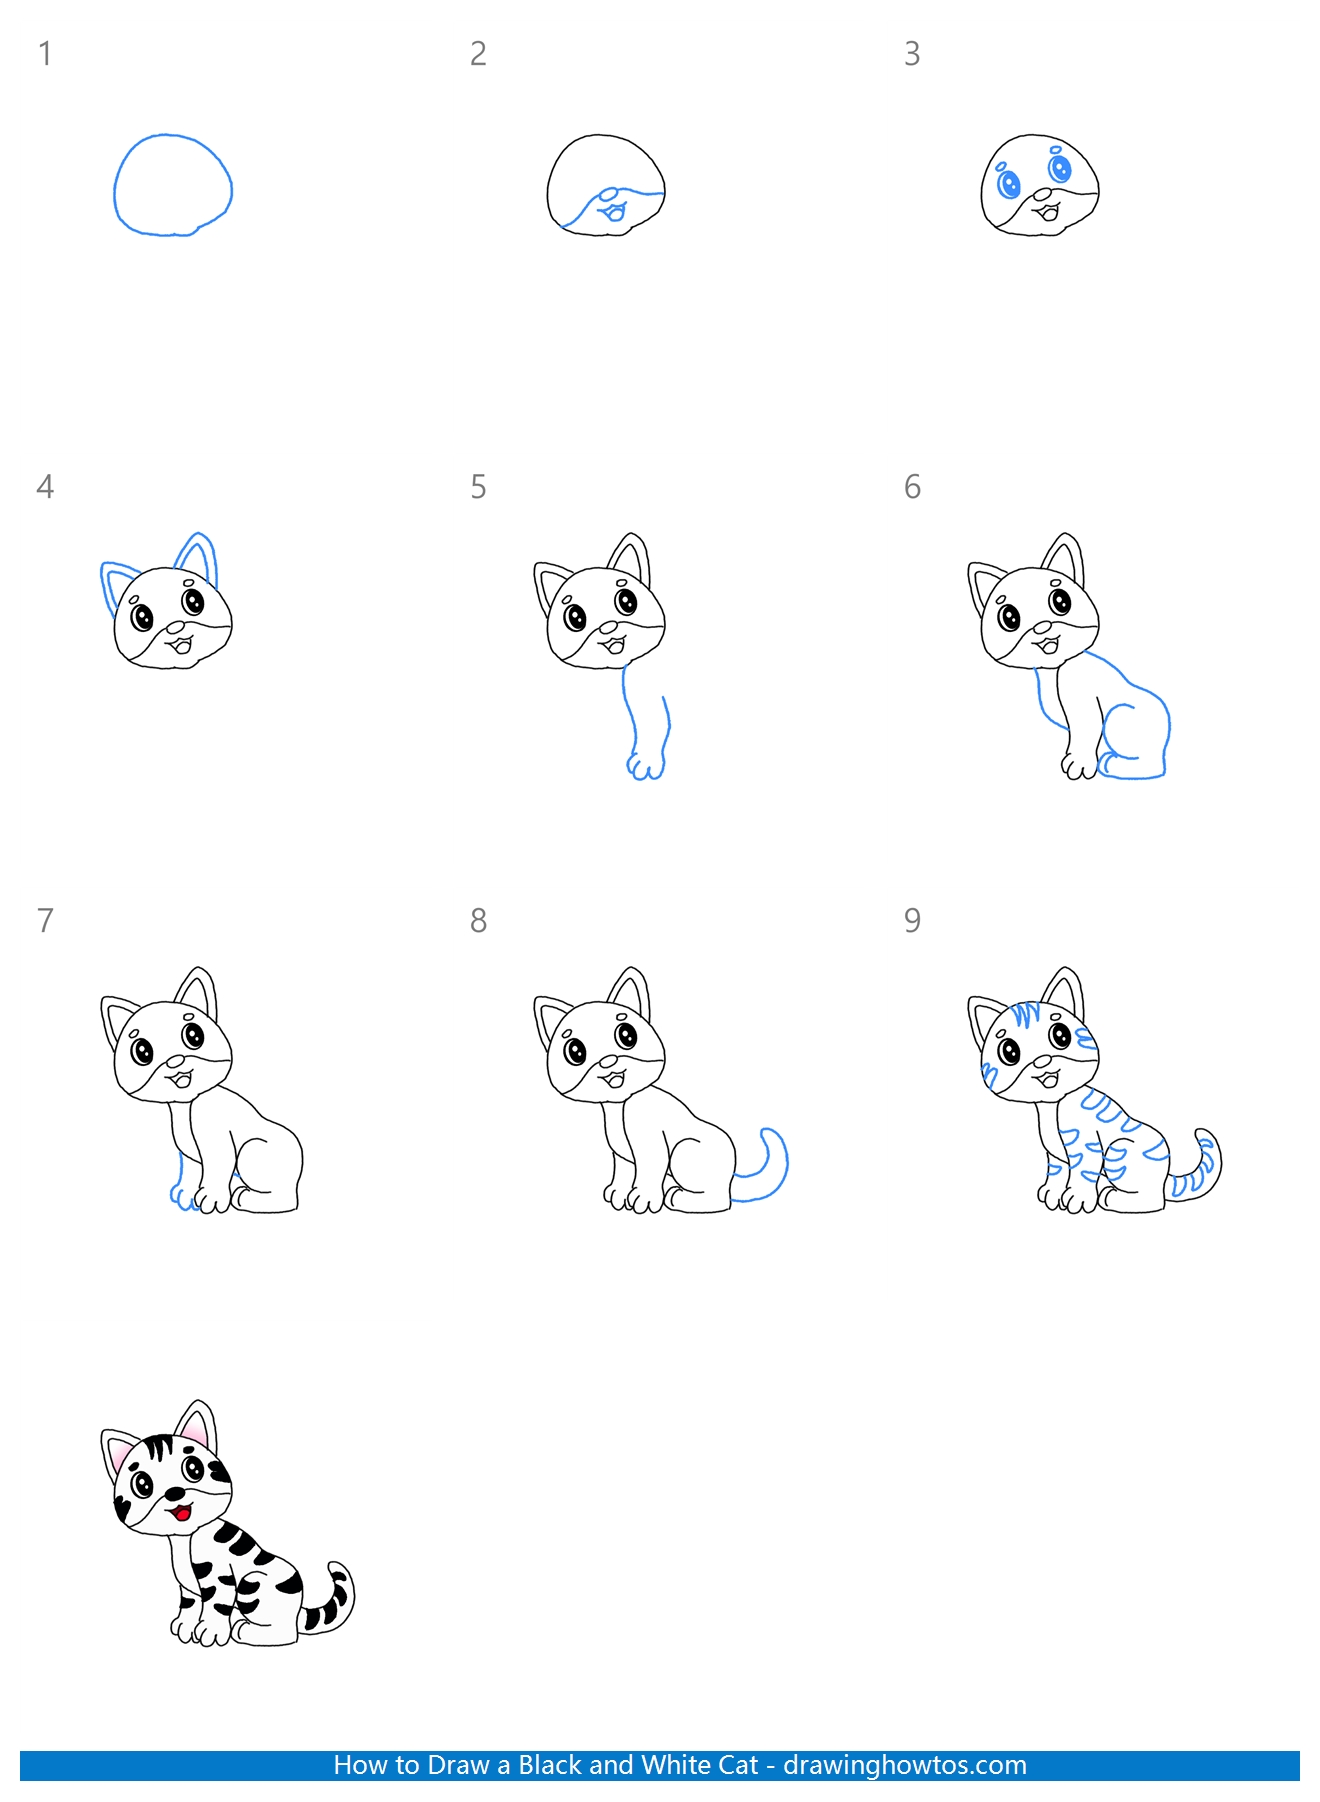 How to Draw a Black and White Cat Step by Step